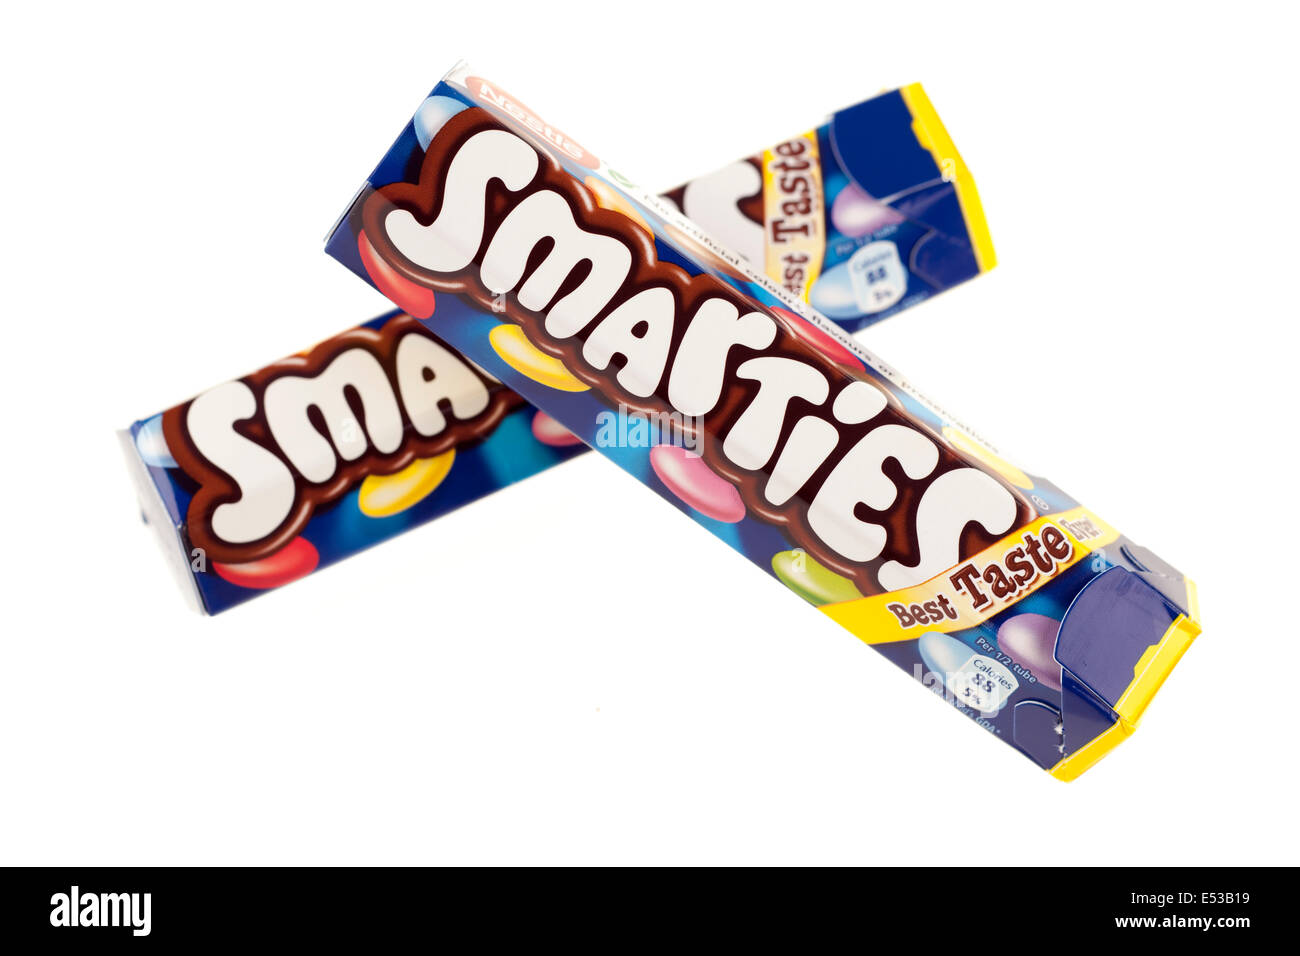 Two tubes of Nestle Smarties sweets Stock Photo